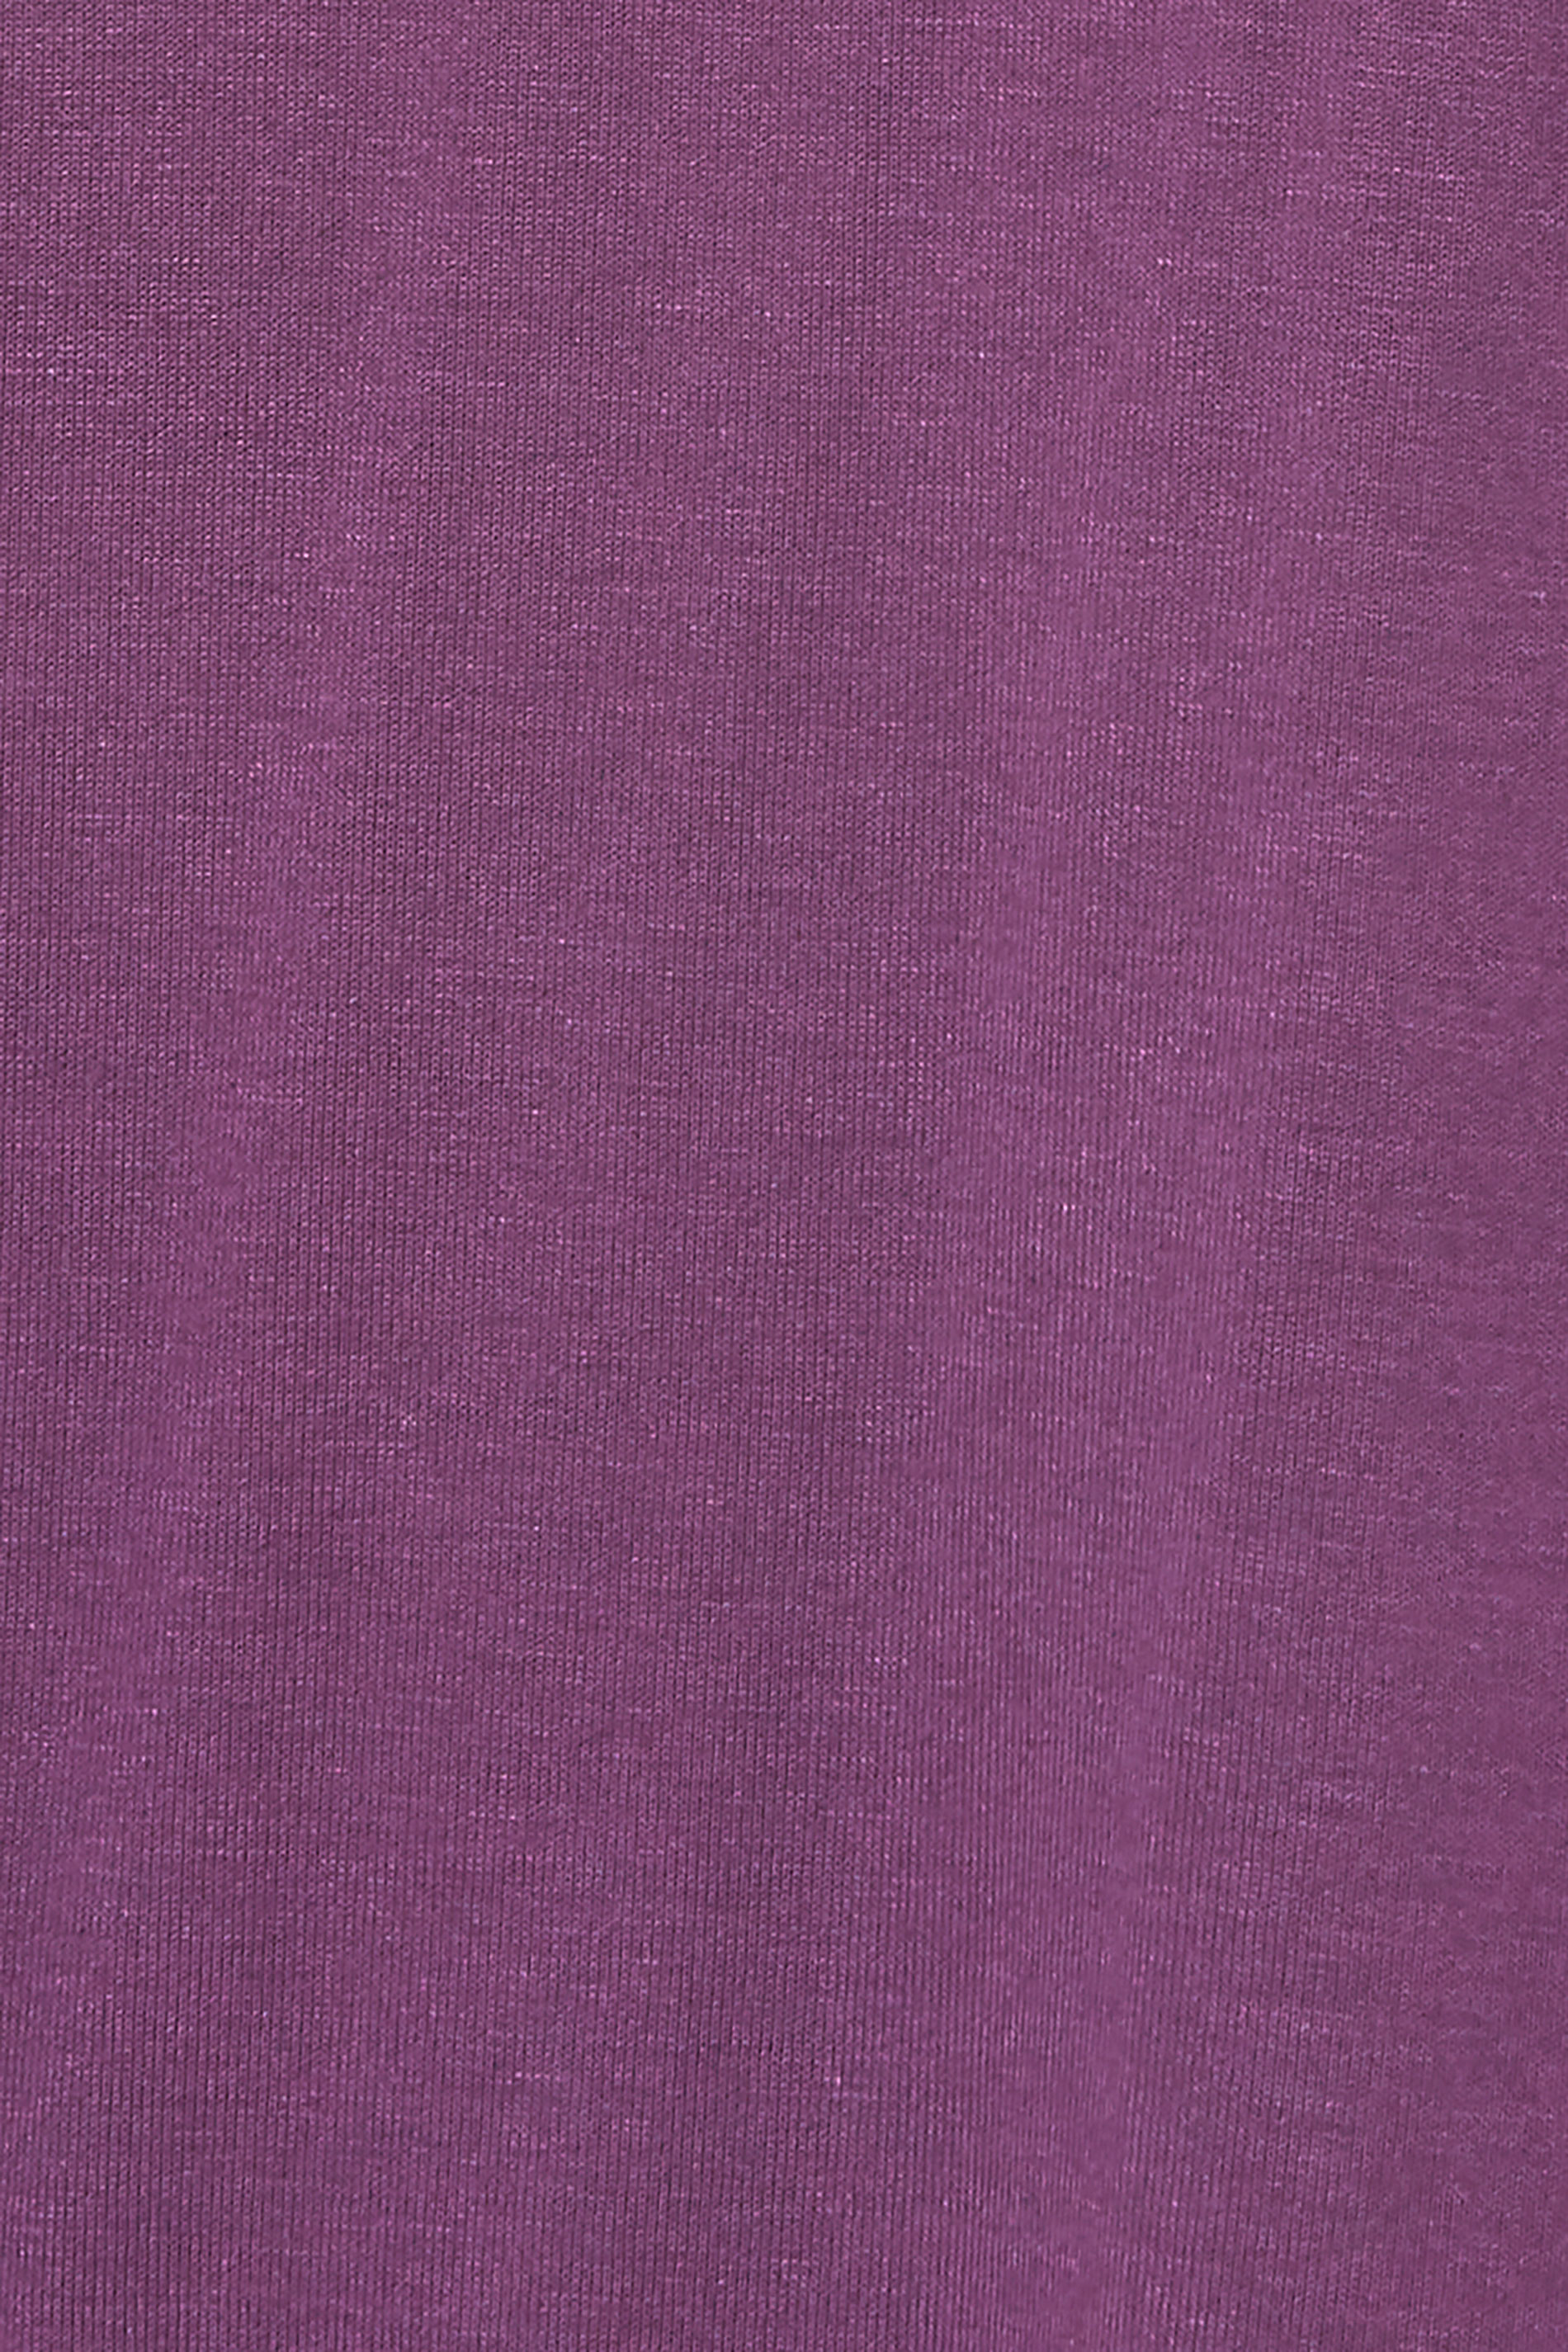 Grande taille  Tops Grande taille  T-Shirts | T-Shirt Violet Ourlet Plongeant - SA57484